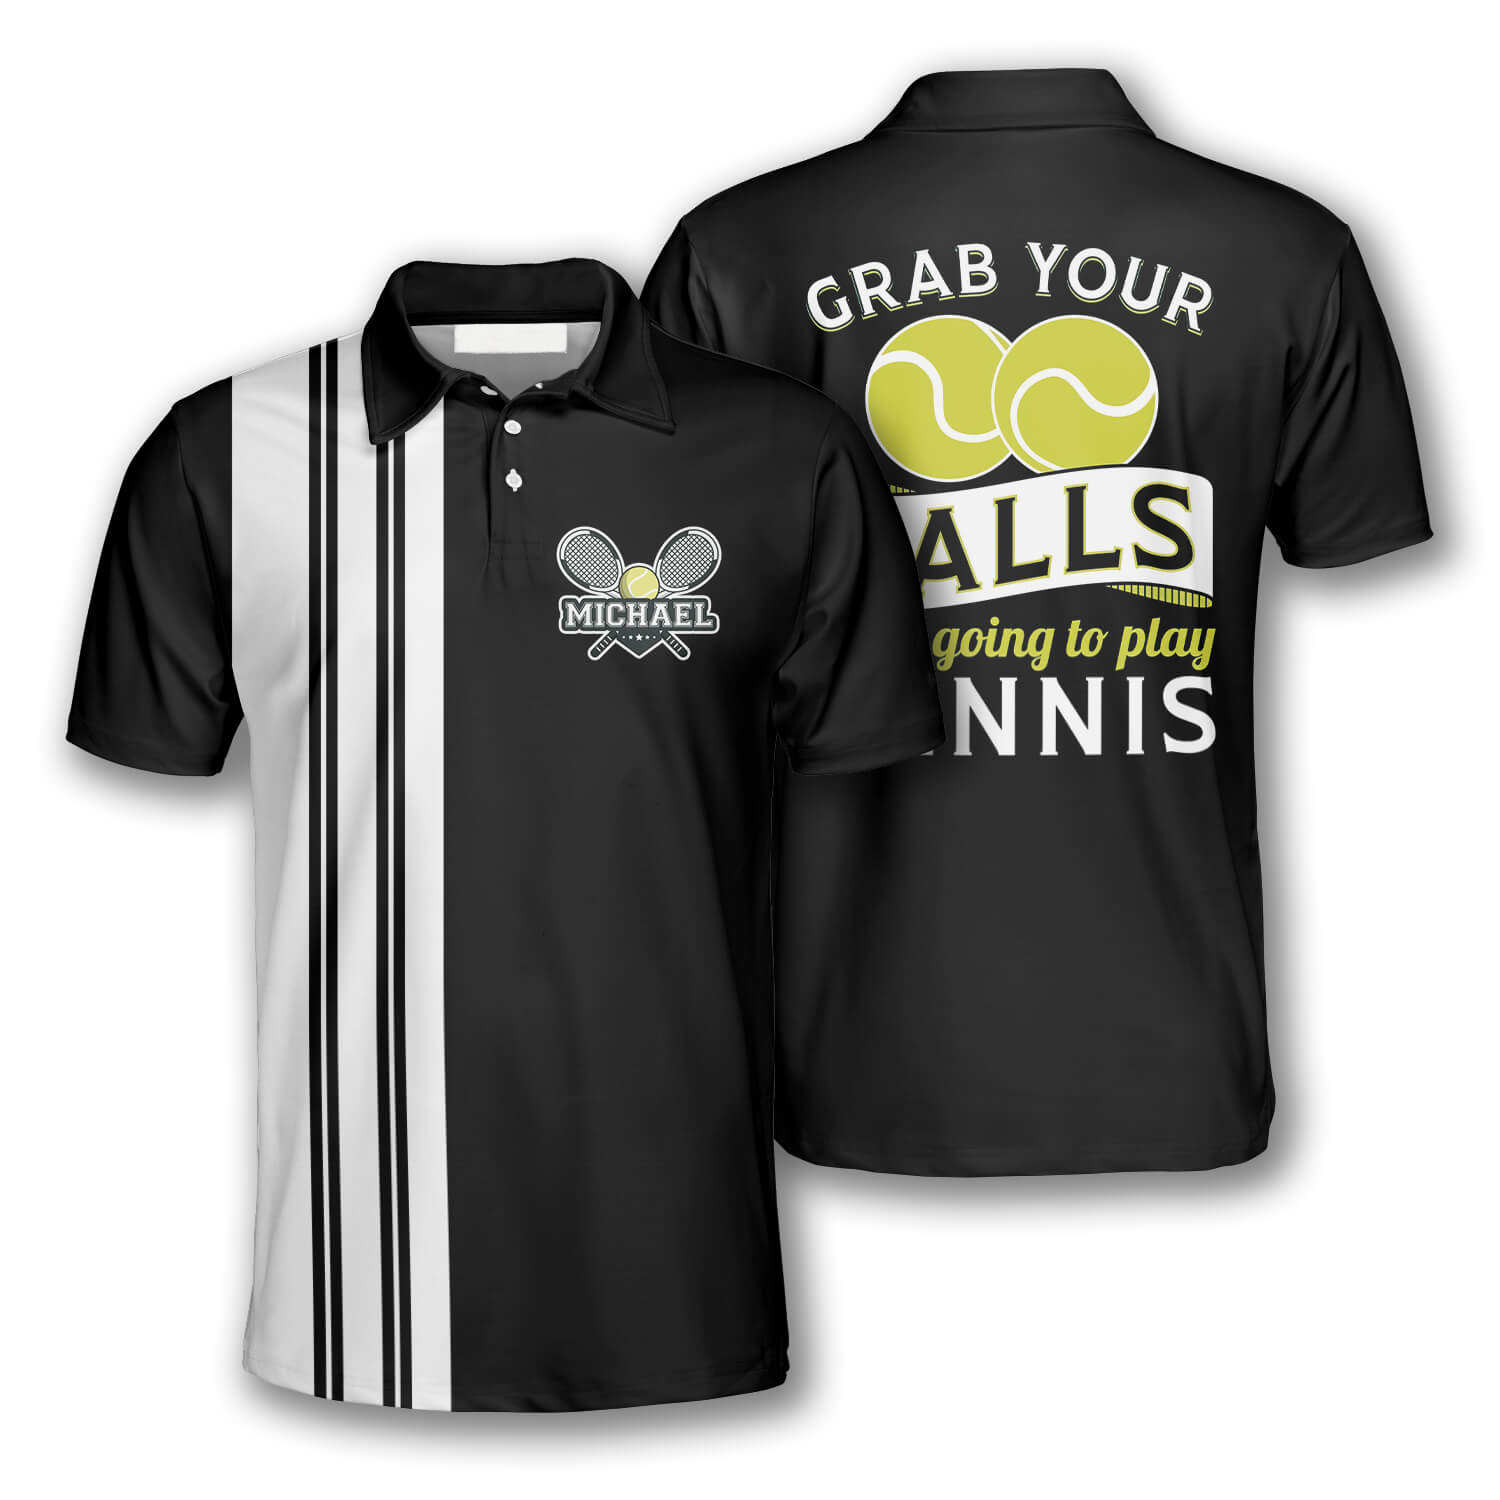 Grab Your Balls We’re Going to Play Tennis Custom Polo Tennis Shirts for Men